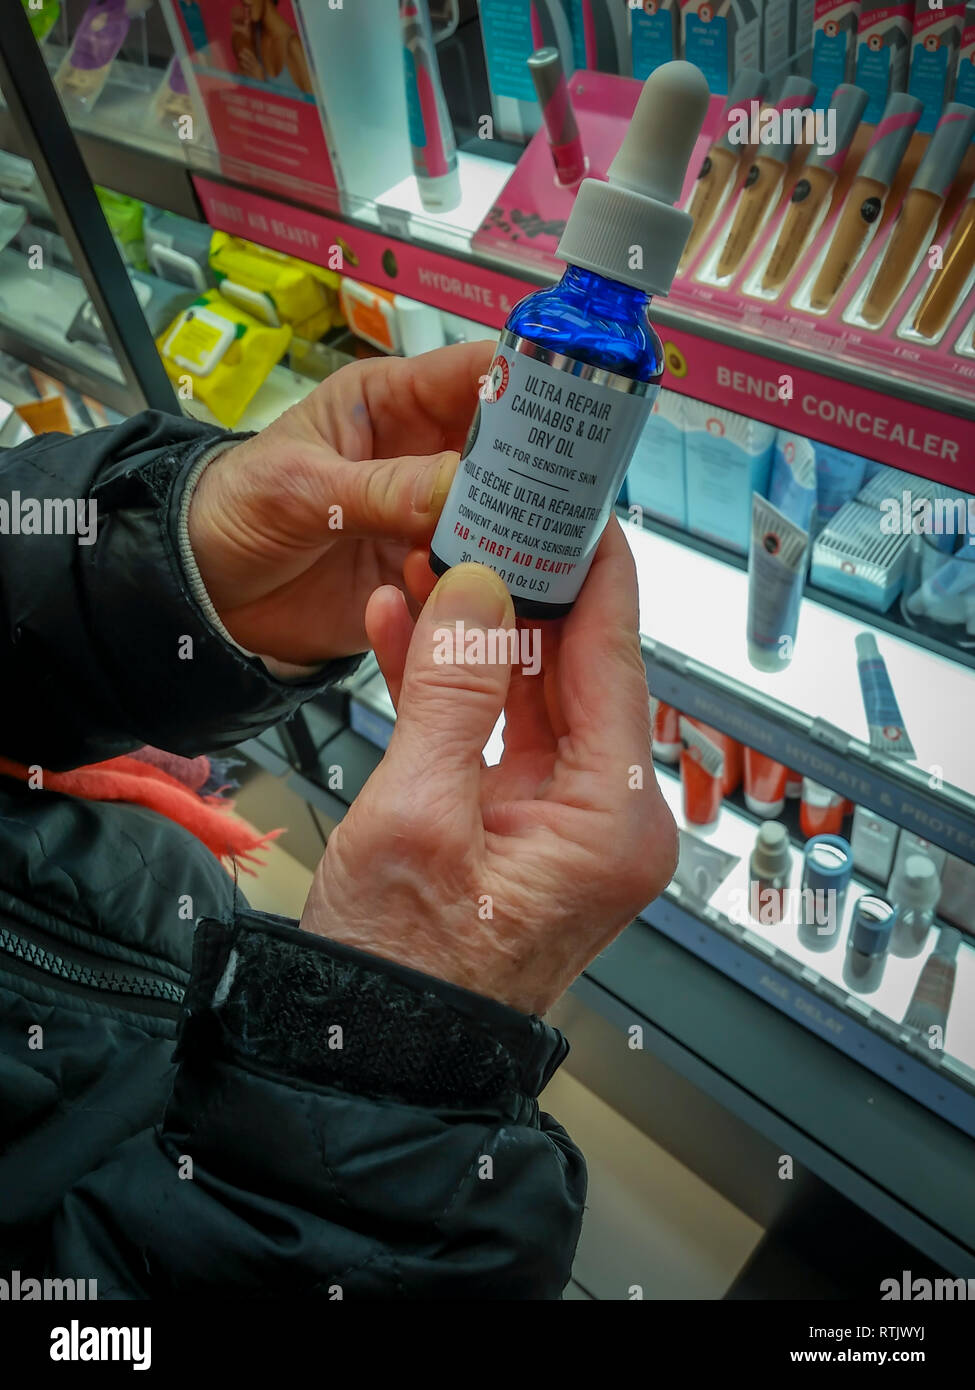 A woman holds a bottle of First Aid Beauty brand "Ultra Repair Cannabis and Oat Dry Oil" in a health and beauty supply store in New York on Sunday, February 24, 2019. The produce contains Cannabis Sativa Seed Oil from hemp and is part of the growing trend of infusing products with hemp and CBD related ingredients. (Â© Richard B. Levine) Stock Photo